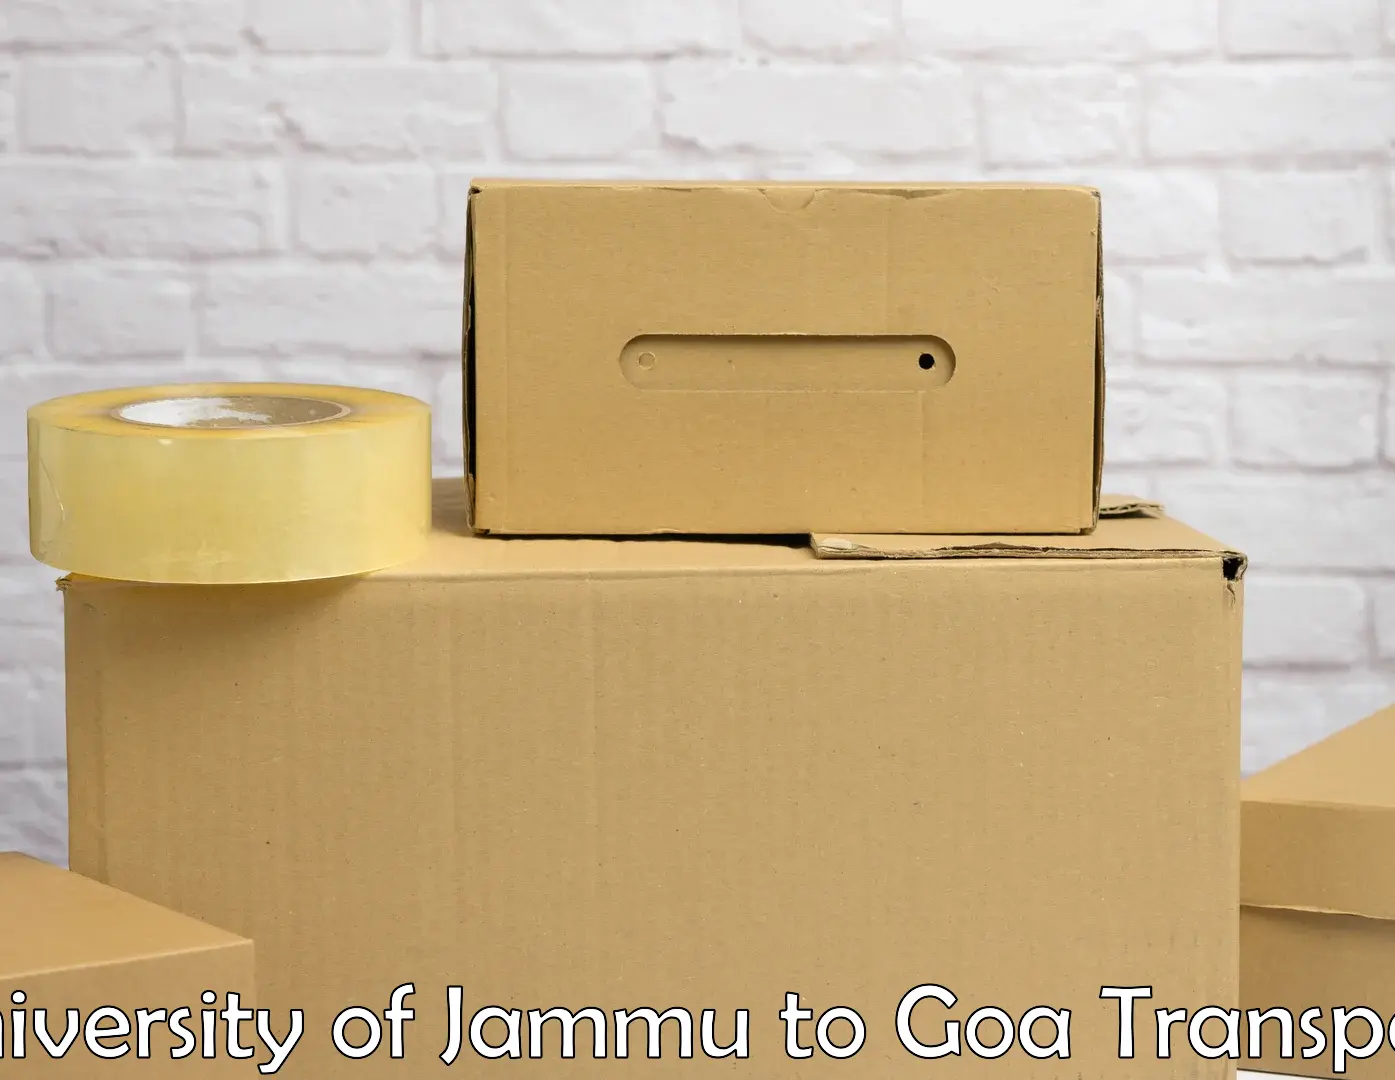 Transport bike from one state to another University of Jammu to Bicholim